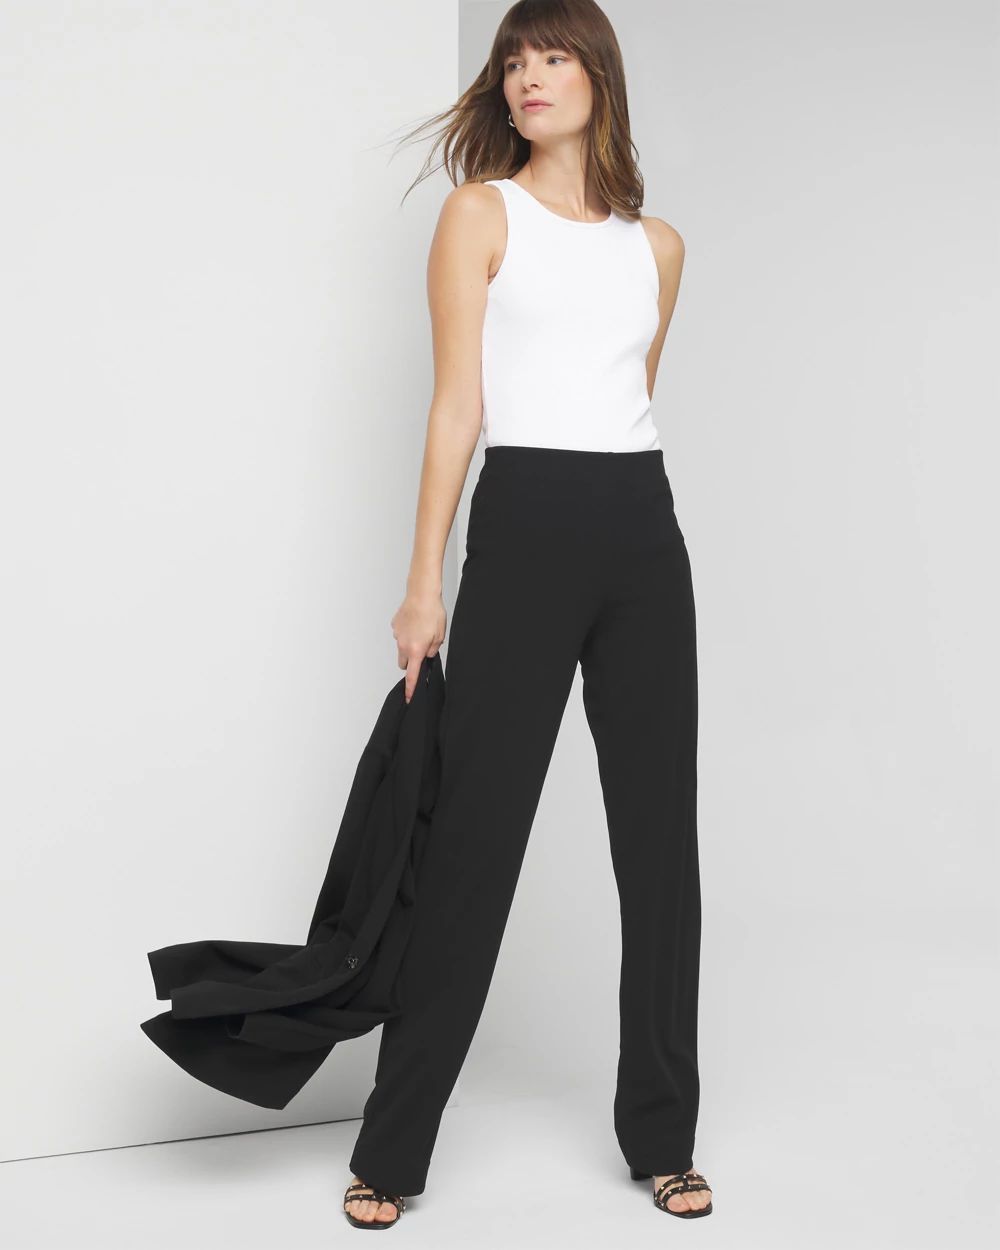 WHBM® Slip On Wide Leg Pant click to view larger image.